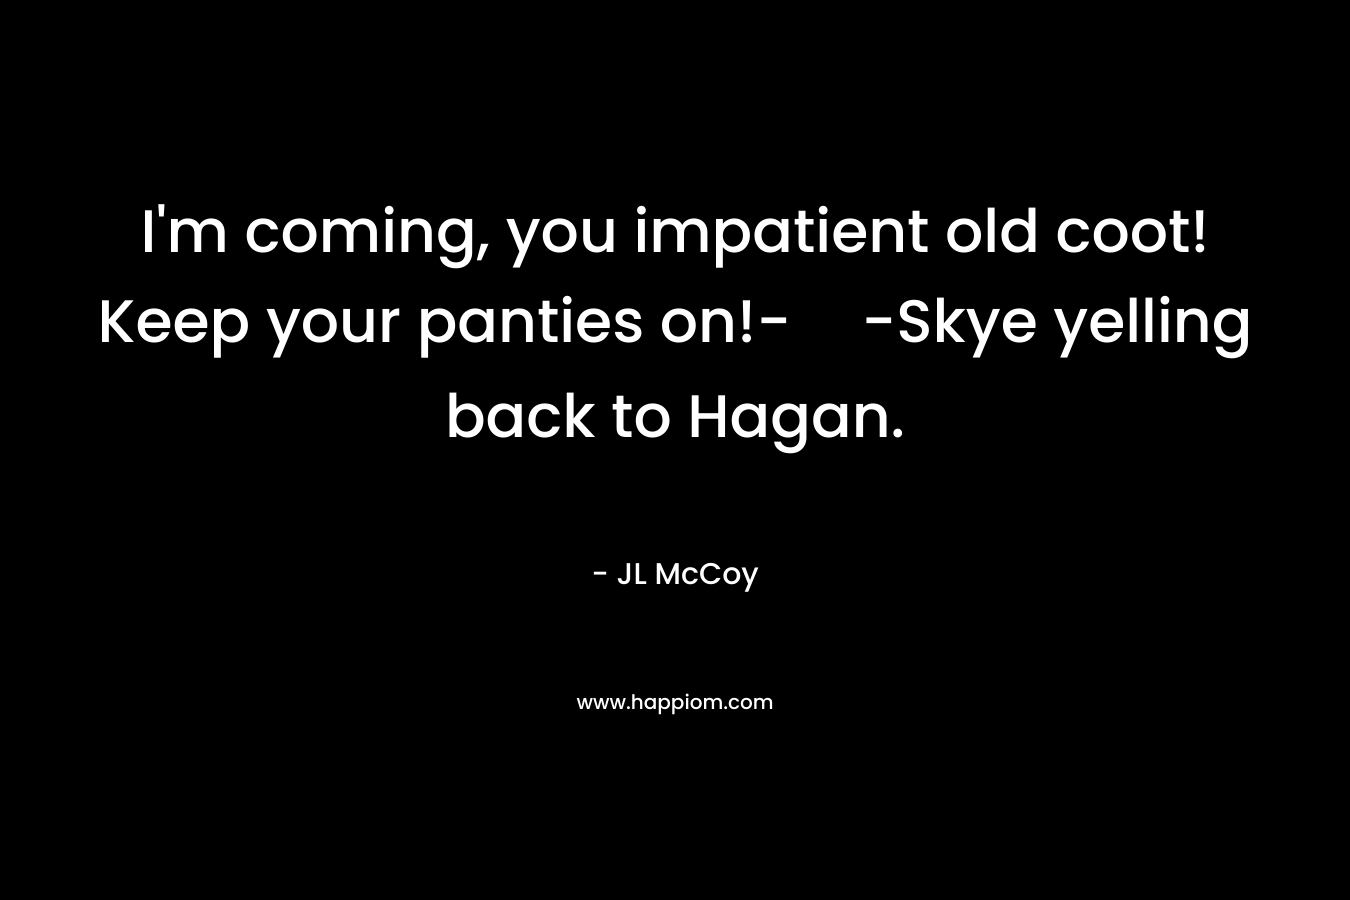 I'm coming, you impatient old coot! Keep your panties on!--Skye yelling back to Hagan.